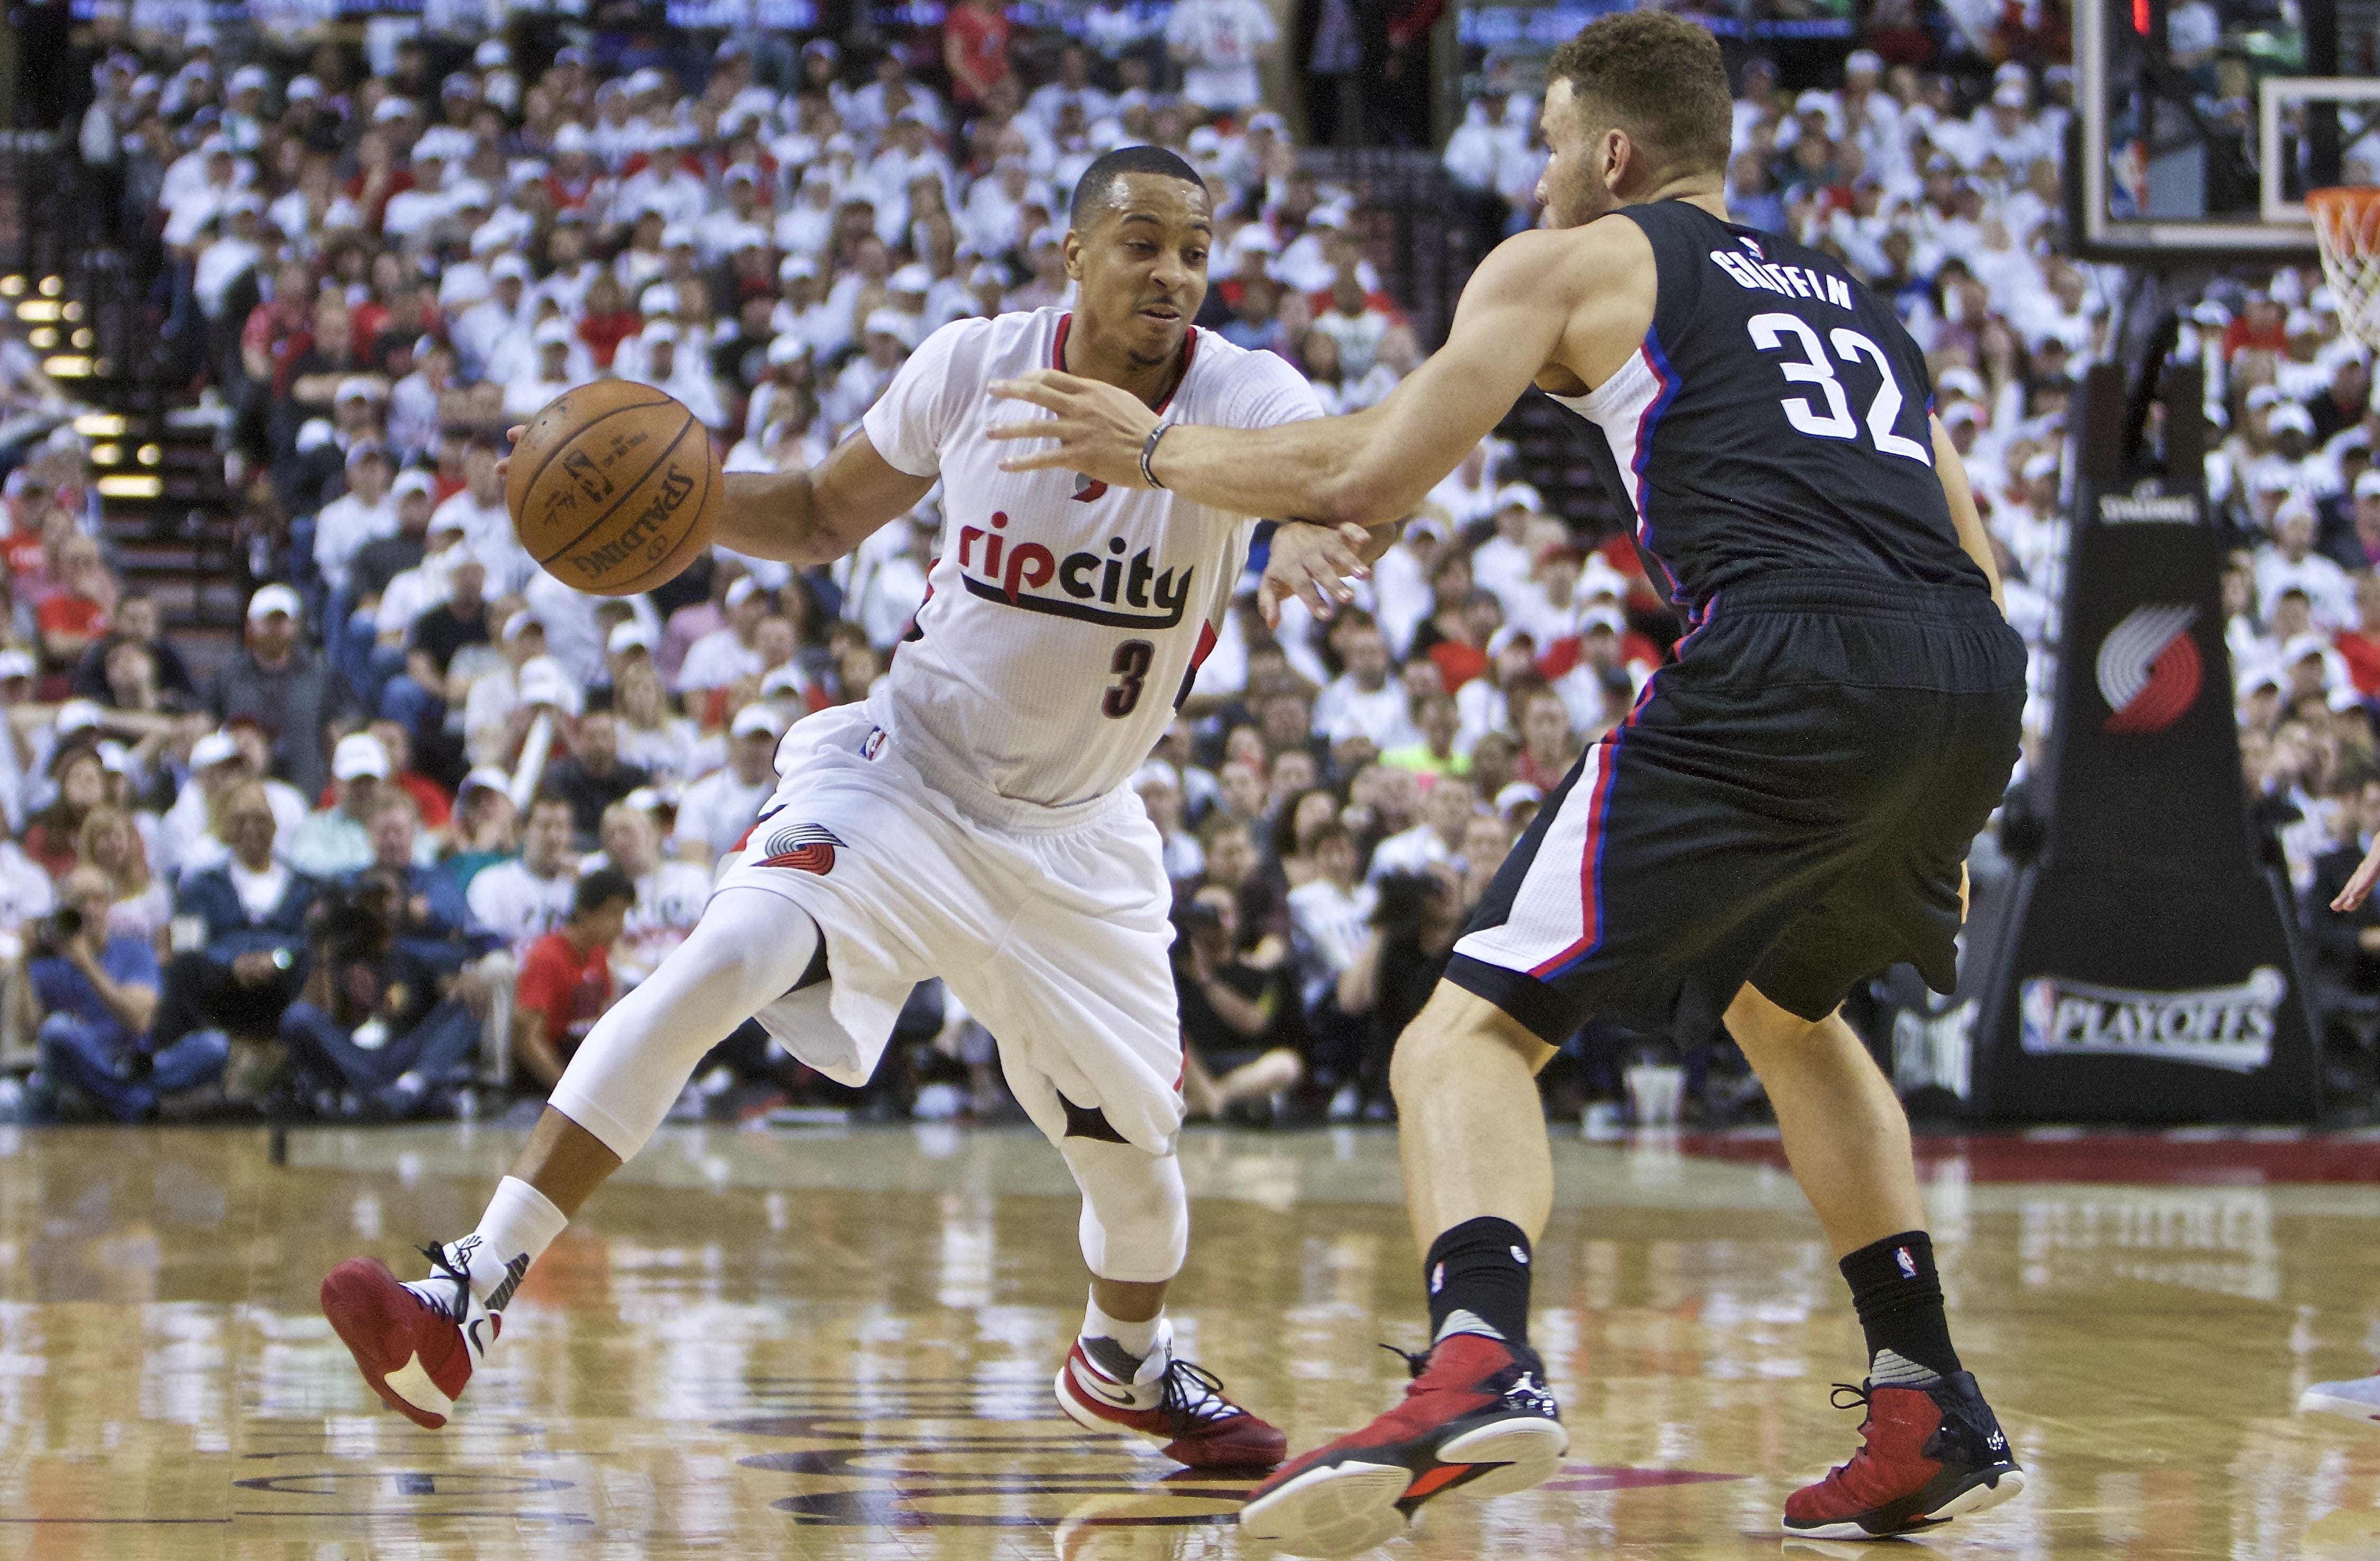 Portland Trail Blazers guard C.J. McCollum, left, dribbles past Los Angeles Clippers forward Blake Griffin, right, during the second half of Game 3 of an NBA basketball first-round playoff series Saturday, April 23, 2016, in Portland, Ore. Portland won 96-88.